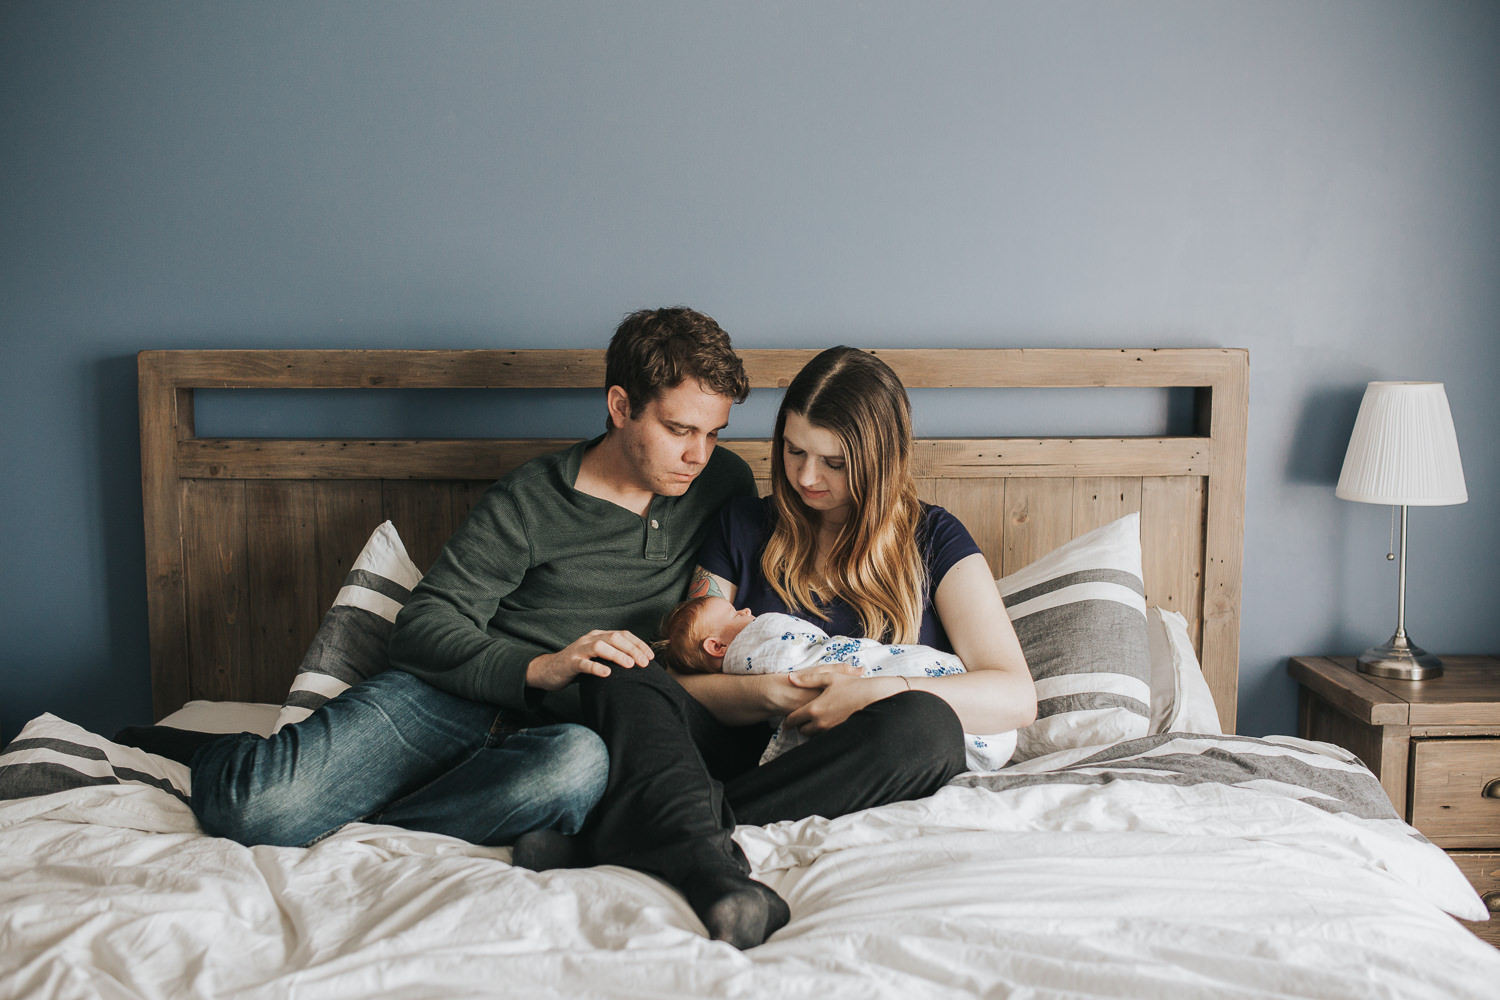 family of 3, new parents sitting on bed holding and looking at 2 week old baby girl with red hair - Newmarket Lifestyle Photography